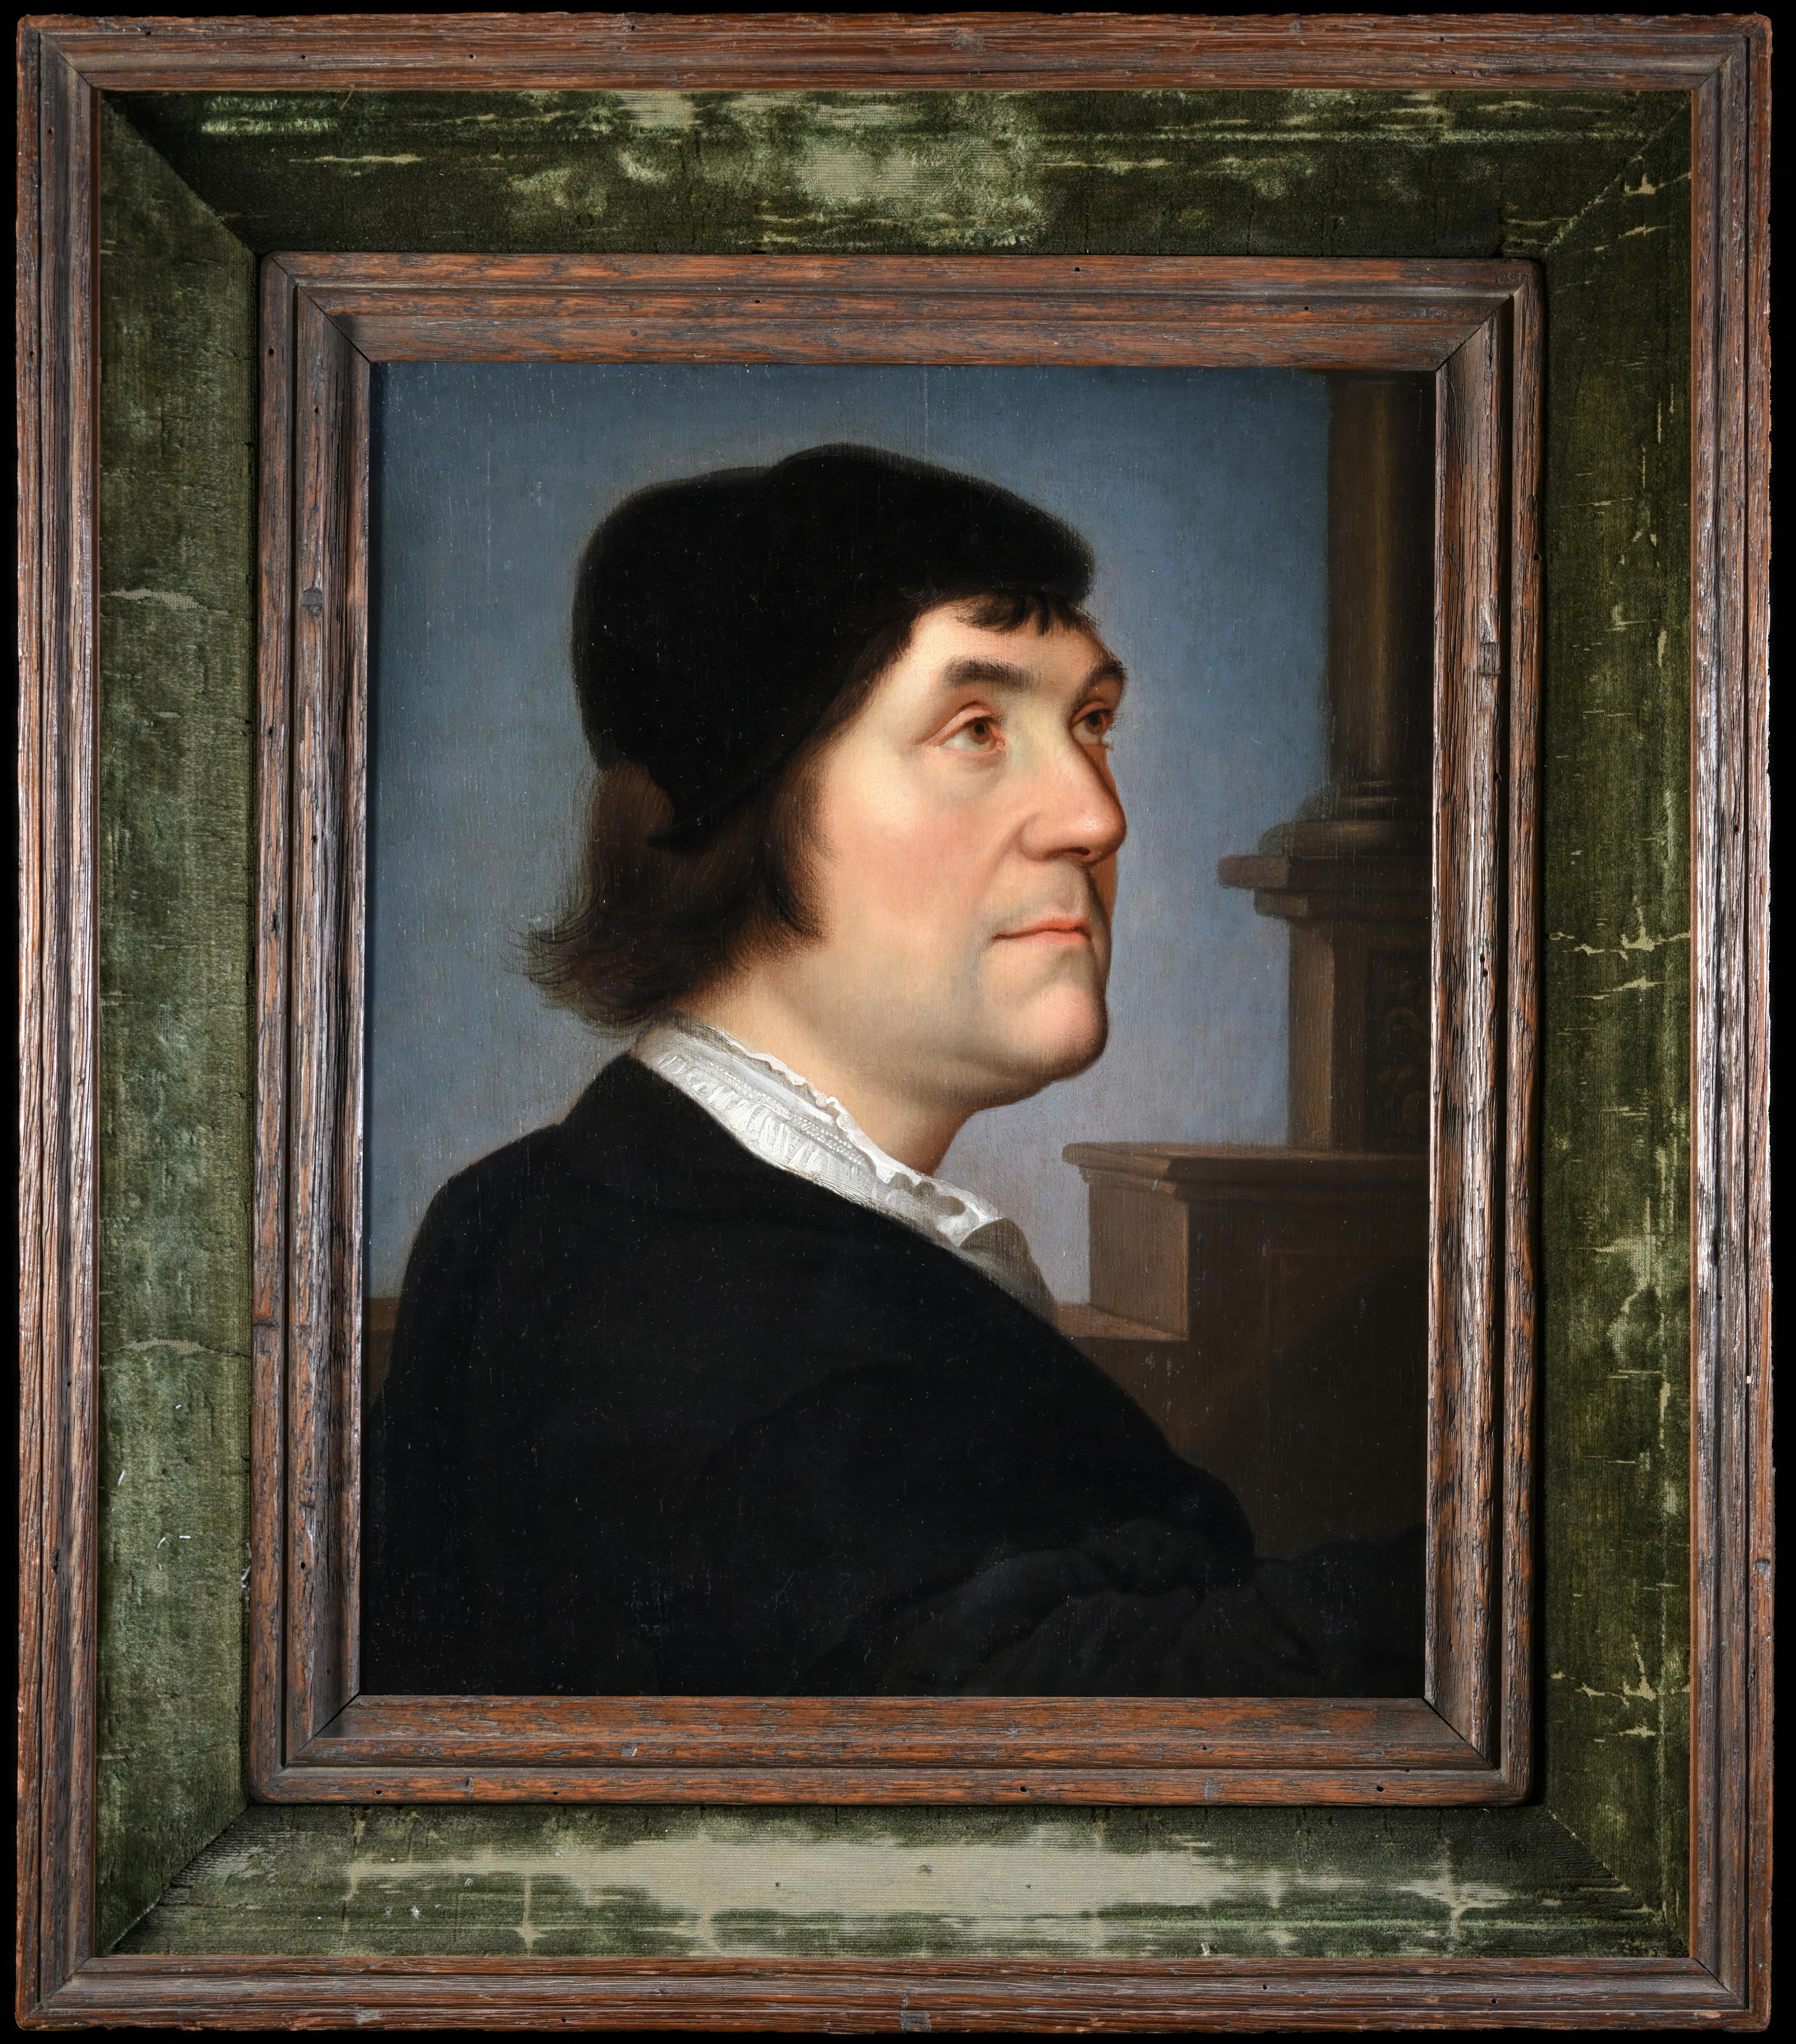 A portrait of courtier and politician John Poyntz, after Hans Holbein, circa 1644 - 1674. This painting is based on a drawing by Hans Holbein, part of the drawings collection of the Windsor castle. A dendrochronological consultancy report was